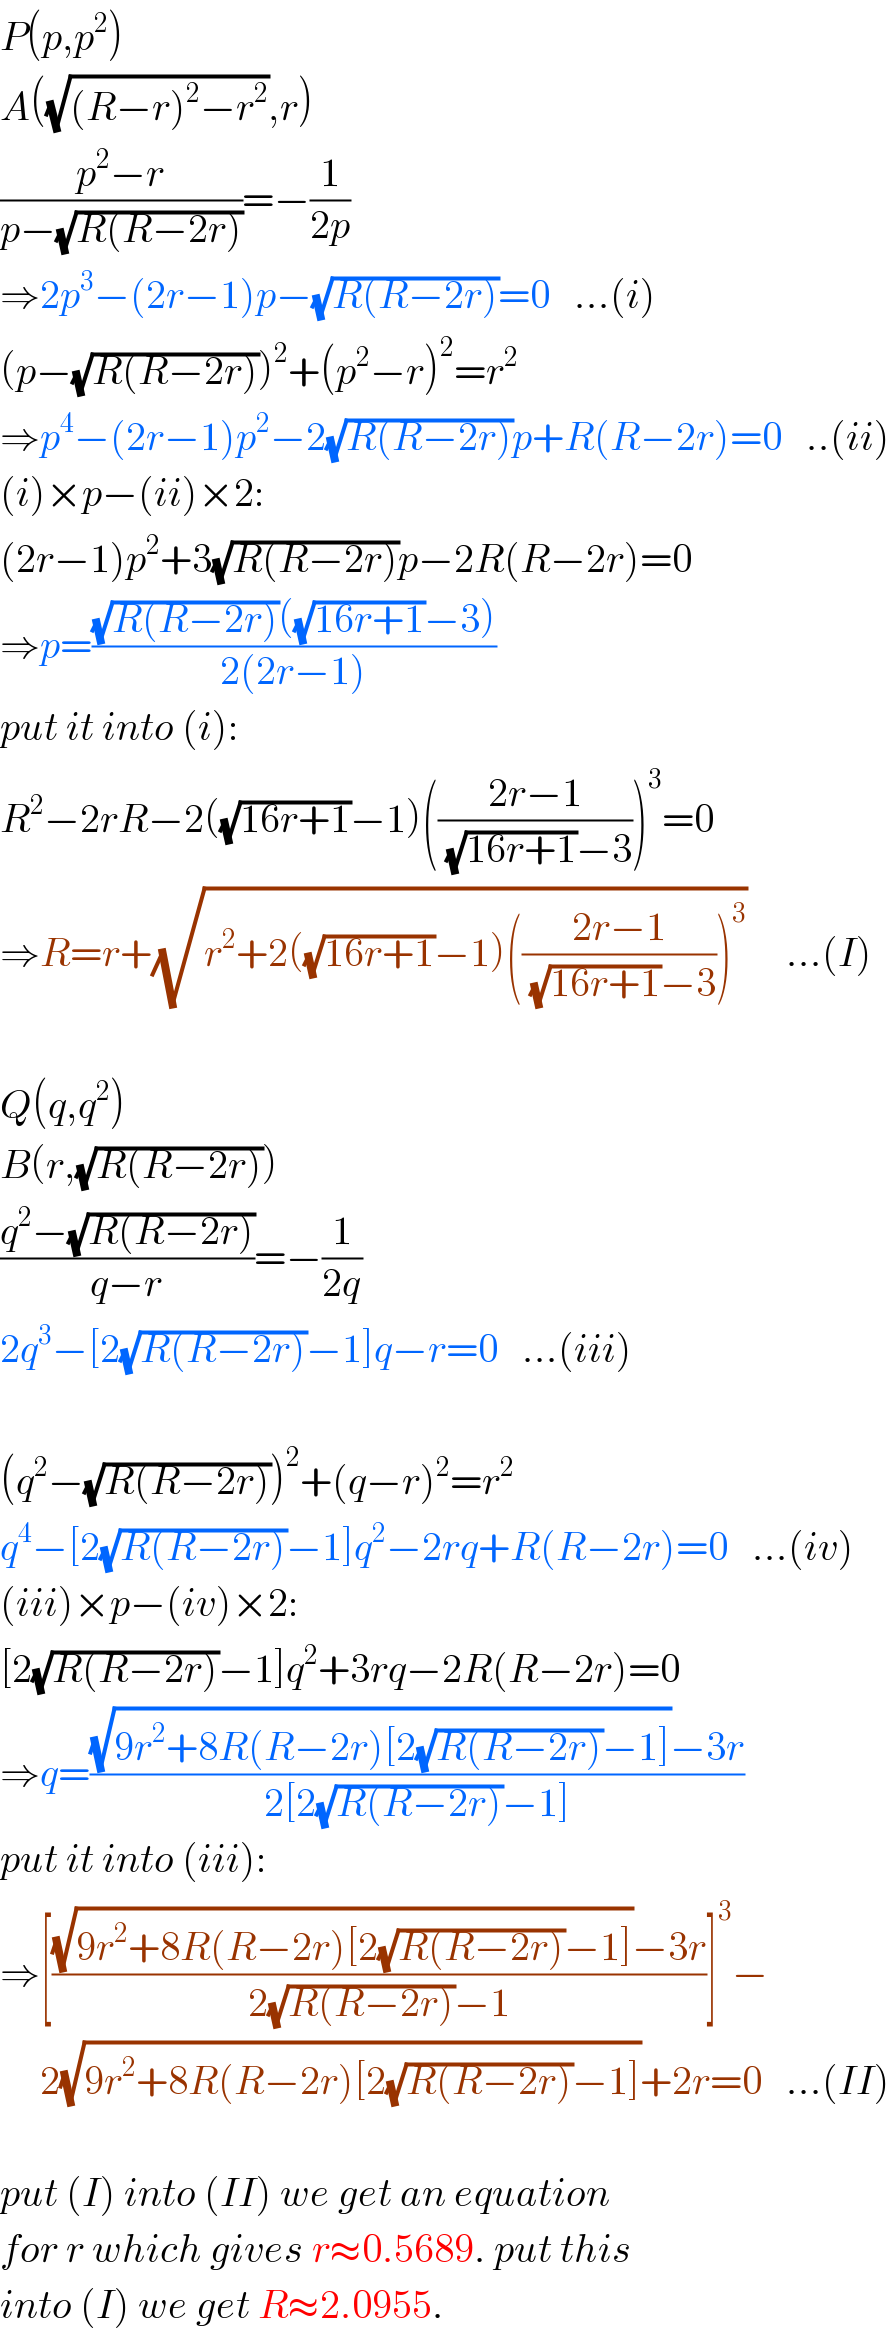 P(p,p^2 )  A((√((R−r)^2 −r^2 )),r)  ((p^2 −r)/(p−(√(R(R−2r)))))=−(1/(2p))  ⇒2p^3 −(2r−1)p−(√(R(R−2r)))=0   ...(i)  (p−(√(R(R−2r))))^2 +(p^2 −r)^2 =r^2   ⇒p^4 −(2r−1)p^2 −2(√(R(R−2r)))p+R(R−2r)=0   ..(ii)  (i)×p−(ii)×2:  (2r−1)p^2 +3(√(R(R−2r)))p−2R(R−2r)=0  ⇒p=(((√(R(R−2r)))((√(16r+1))−3))/(2(2r−1)))  put it into (i):  R^2 −2rR−2((√(16r+1))−1)(((2r−1)/( (√(16r+1))−3)))^3 =0  ⇒R=r+(√(r^2 +2((√(16r+1))−1)(((2r−1)/( (√(16r+1))−3)))^3 ))     ...(I)    Q(q,q^2 )  B(r,(√(R(R−2r))))  ((q^2 −(√(R(R−2r))))/(q−r))=−(1/(2q))  2q^3 −[2(√(R(R−2r)))−1]q−r=0   ...(iii)    (q^2 −(√(R(R−2r))))^2 +(q−r)^2 =r^2   q^4 −[2(√(R(R−2r)))−1]q^2 −2rq+R(R−2r)=0   ...(iv)  (iii)×p−(iv)×2:  [2(√(R(R−2r)))−1]q^2 +3rq−2R(R−2r)=0  ⇒q=(((√(9r^2 +8R(R−2r)[2(√(R(R−2r)))−1]))−3r)/(2[2(√(R(R−2r)))−1]))  put it into (iii):  ⇒[(((√(9r^2 +8R(R−2r)[2(√(R(R−2r)))−1]))−3r)/(2(√(R(R−2r)))−1))]^3 −       2(√(9r^2 +8R(R−2r)[2(√(R(R−2r)))−1]))+2r=0   ...(II)    put (I) into (II) we get an equation  for r which gives r≈0.5689. put this  into (I) we get R≈2.0955.  